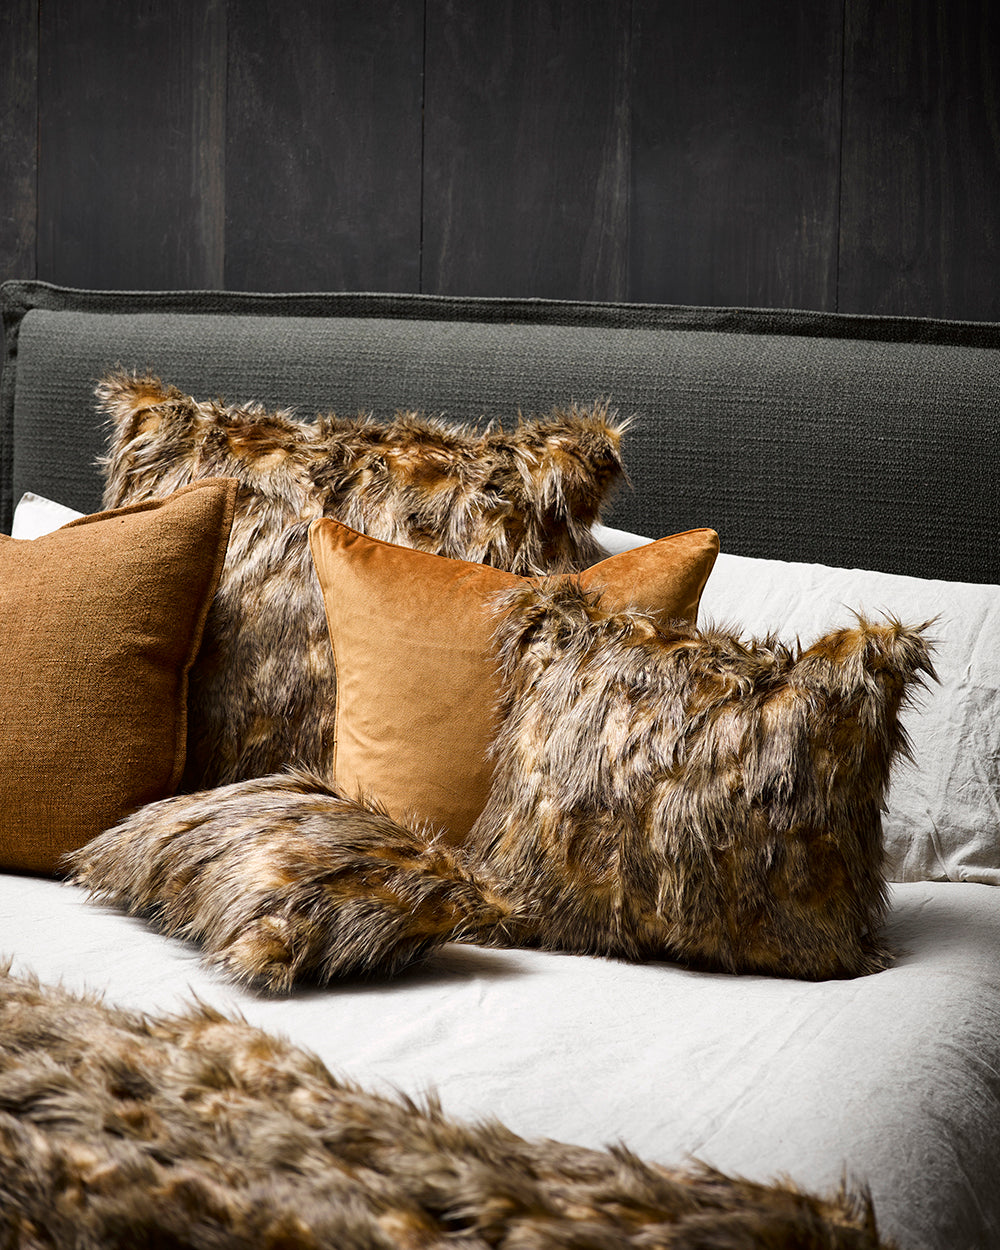 Heirloom Red Fox Cushions in Faux Fur are available from Make Your House A Home Premium Stockist. Furniture Store Bendigo, Victoria. Australia Wide Delivery. Furtex Baya.